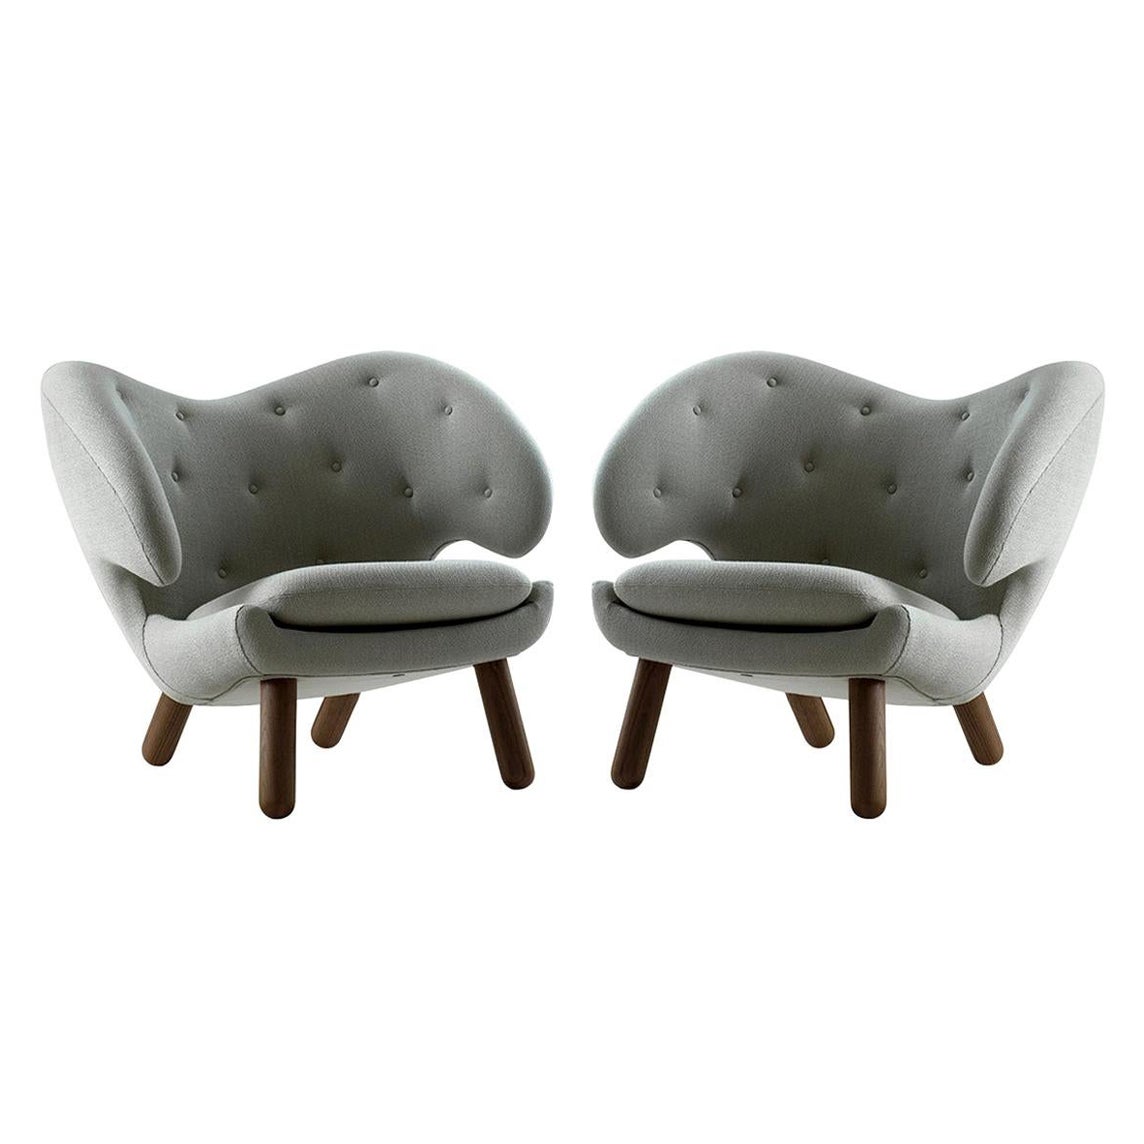 Set of Two Pelican Chairs by Finn Juhl in Wood and Fabric